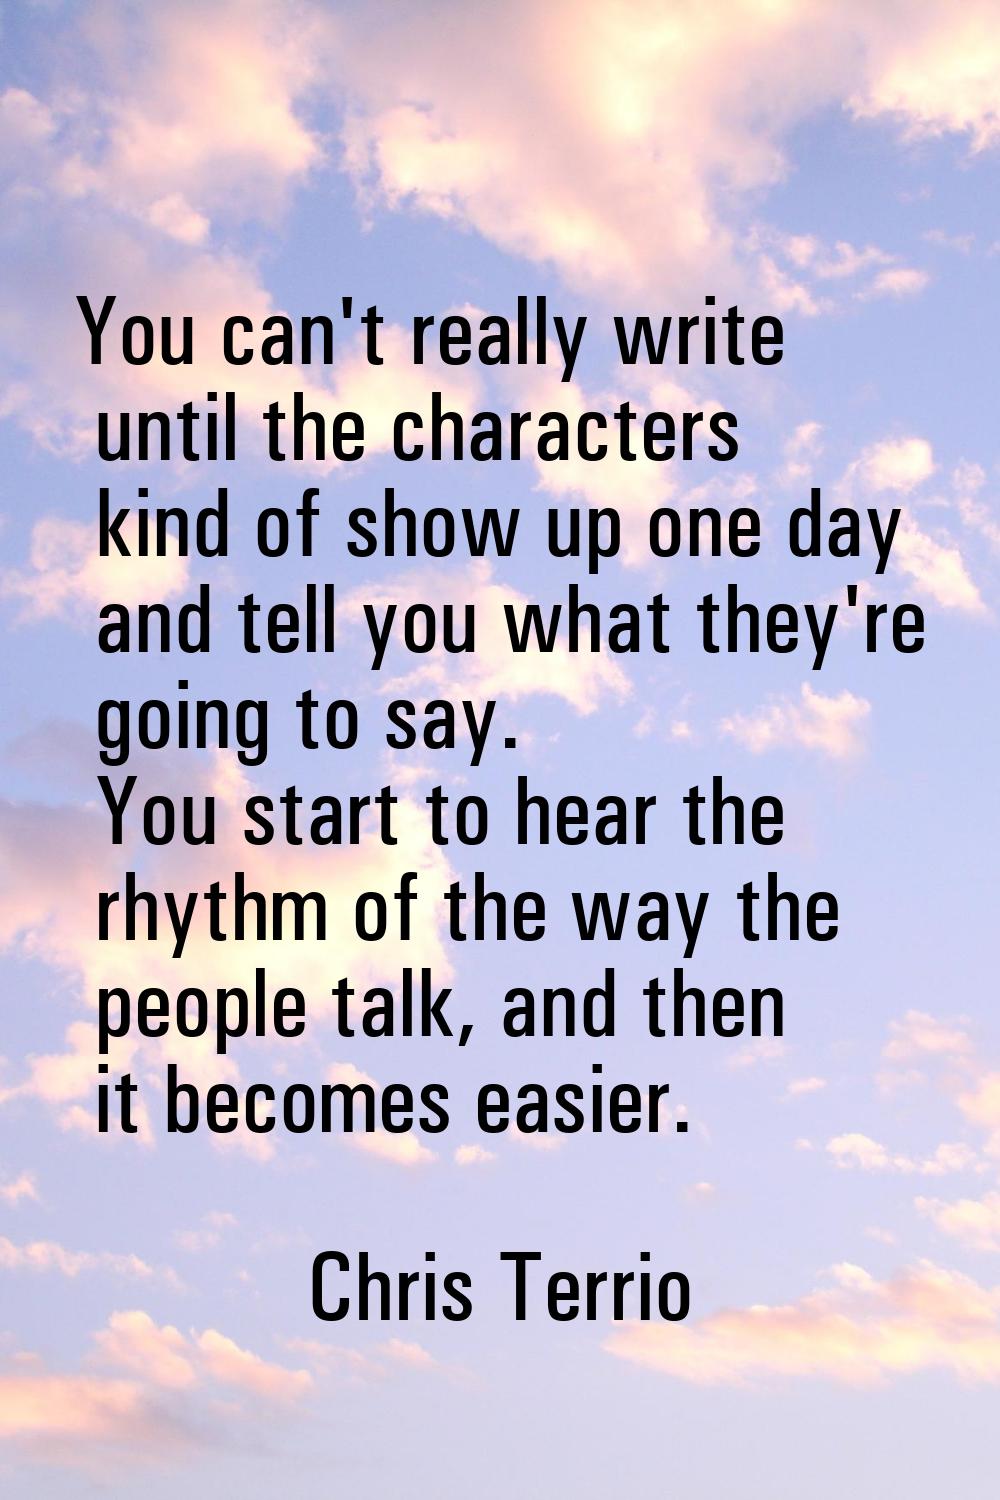 You can't really write until the characters kind of show up one day and tell you what they're going